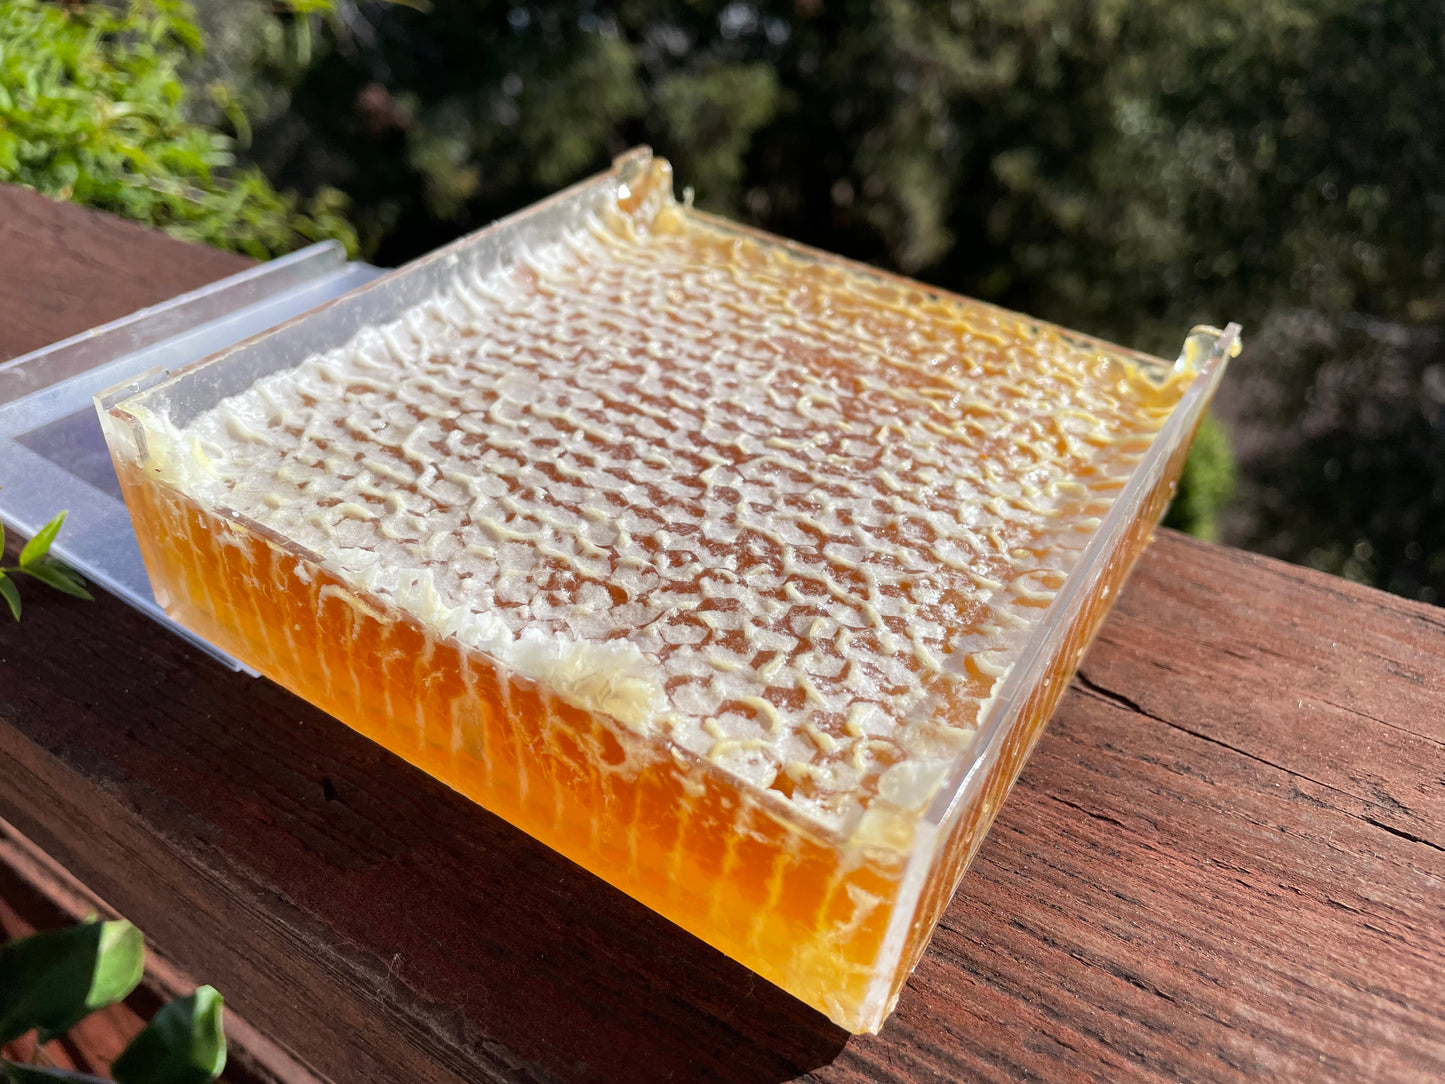 Comb Honey on the San Francisco Peninsula - Nature's Artistry in Every Cell